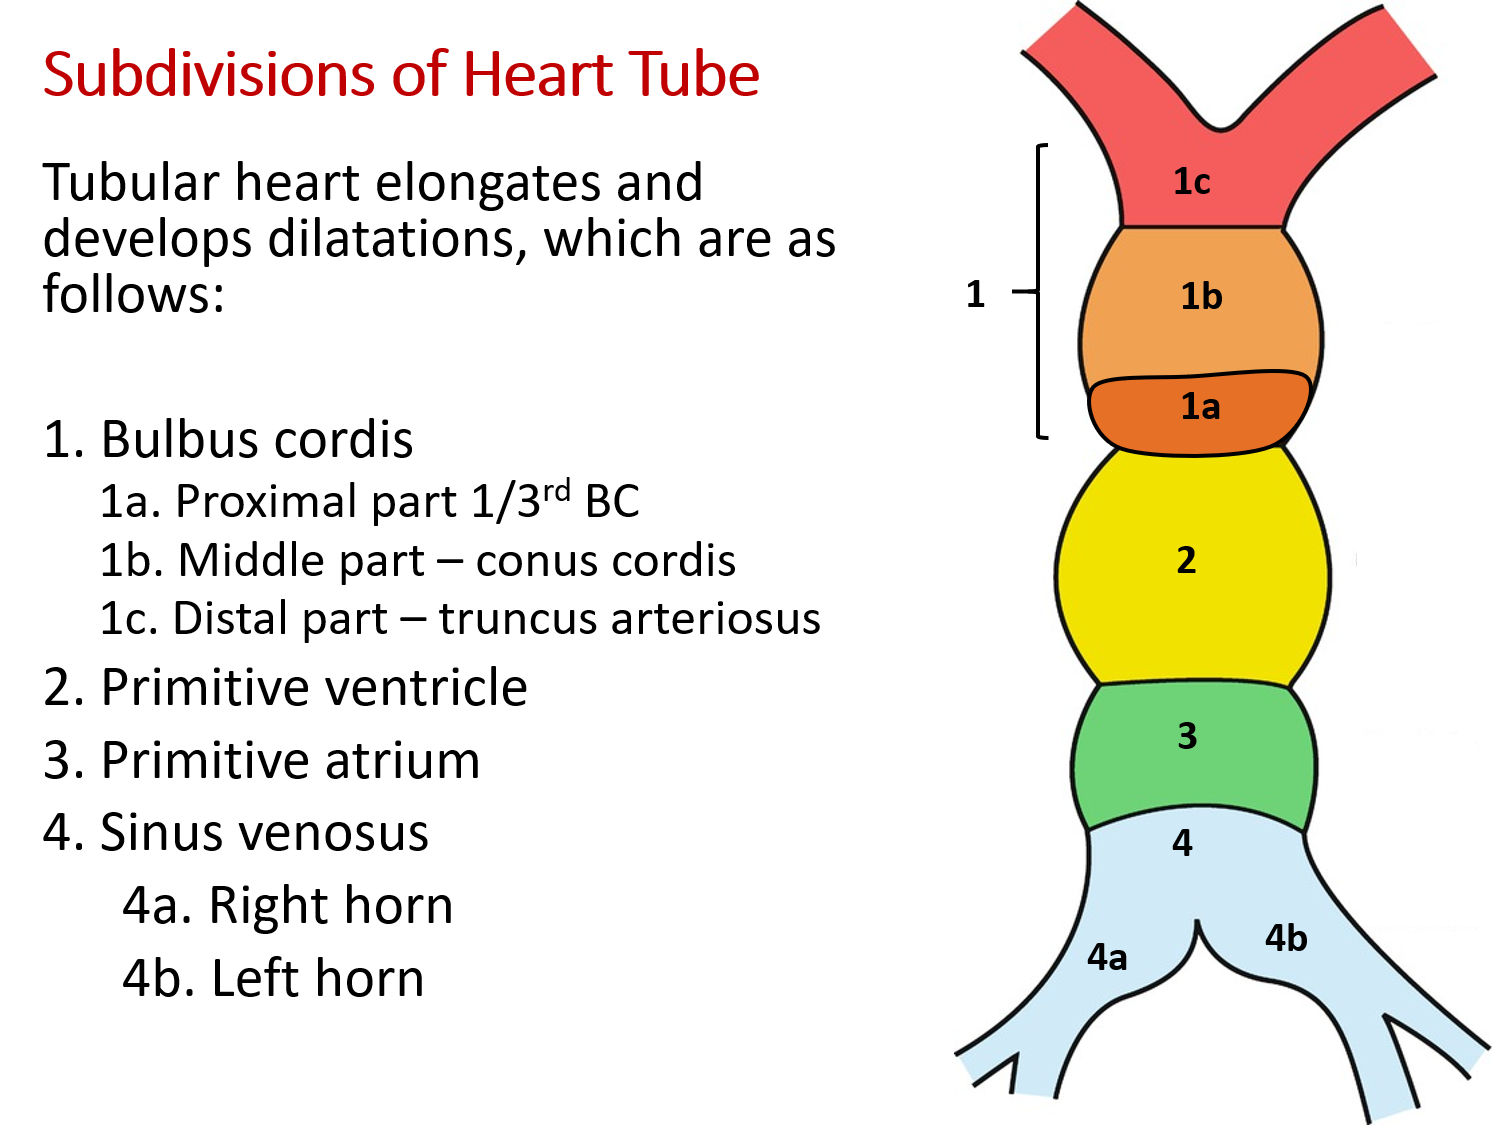 Subdivisions of developing heart tube